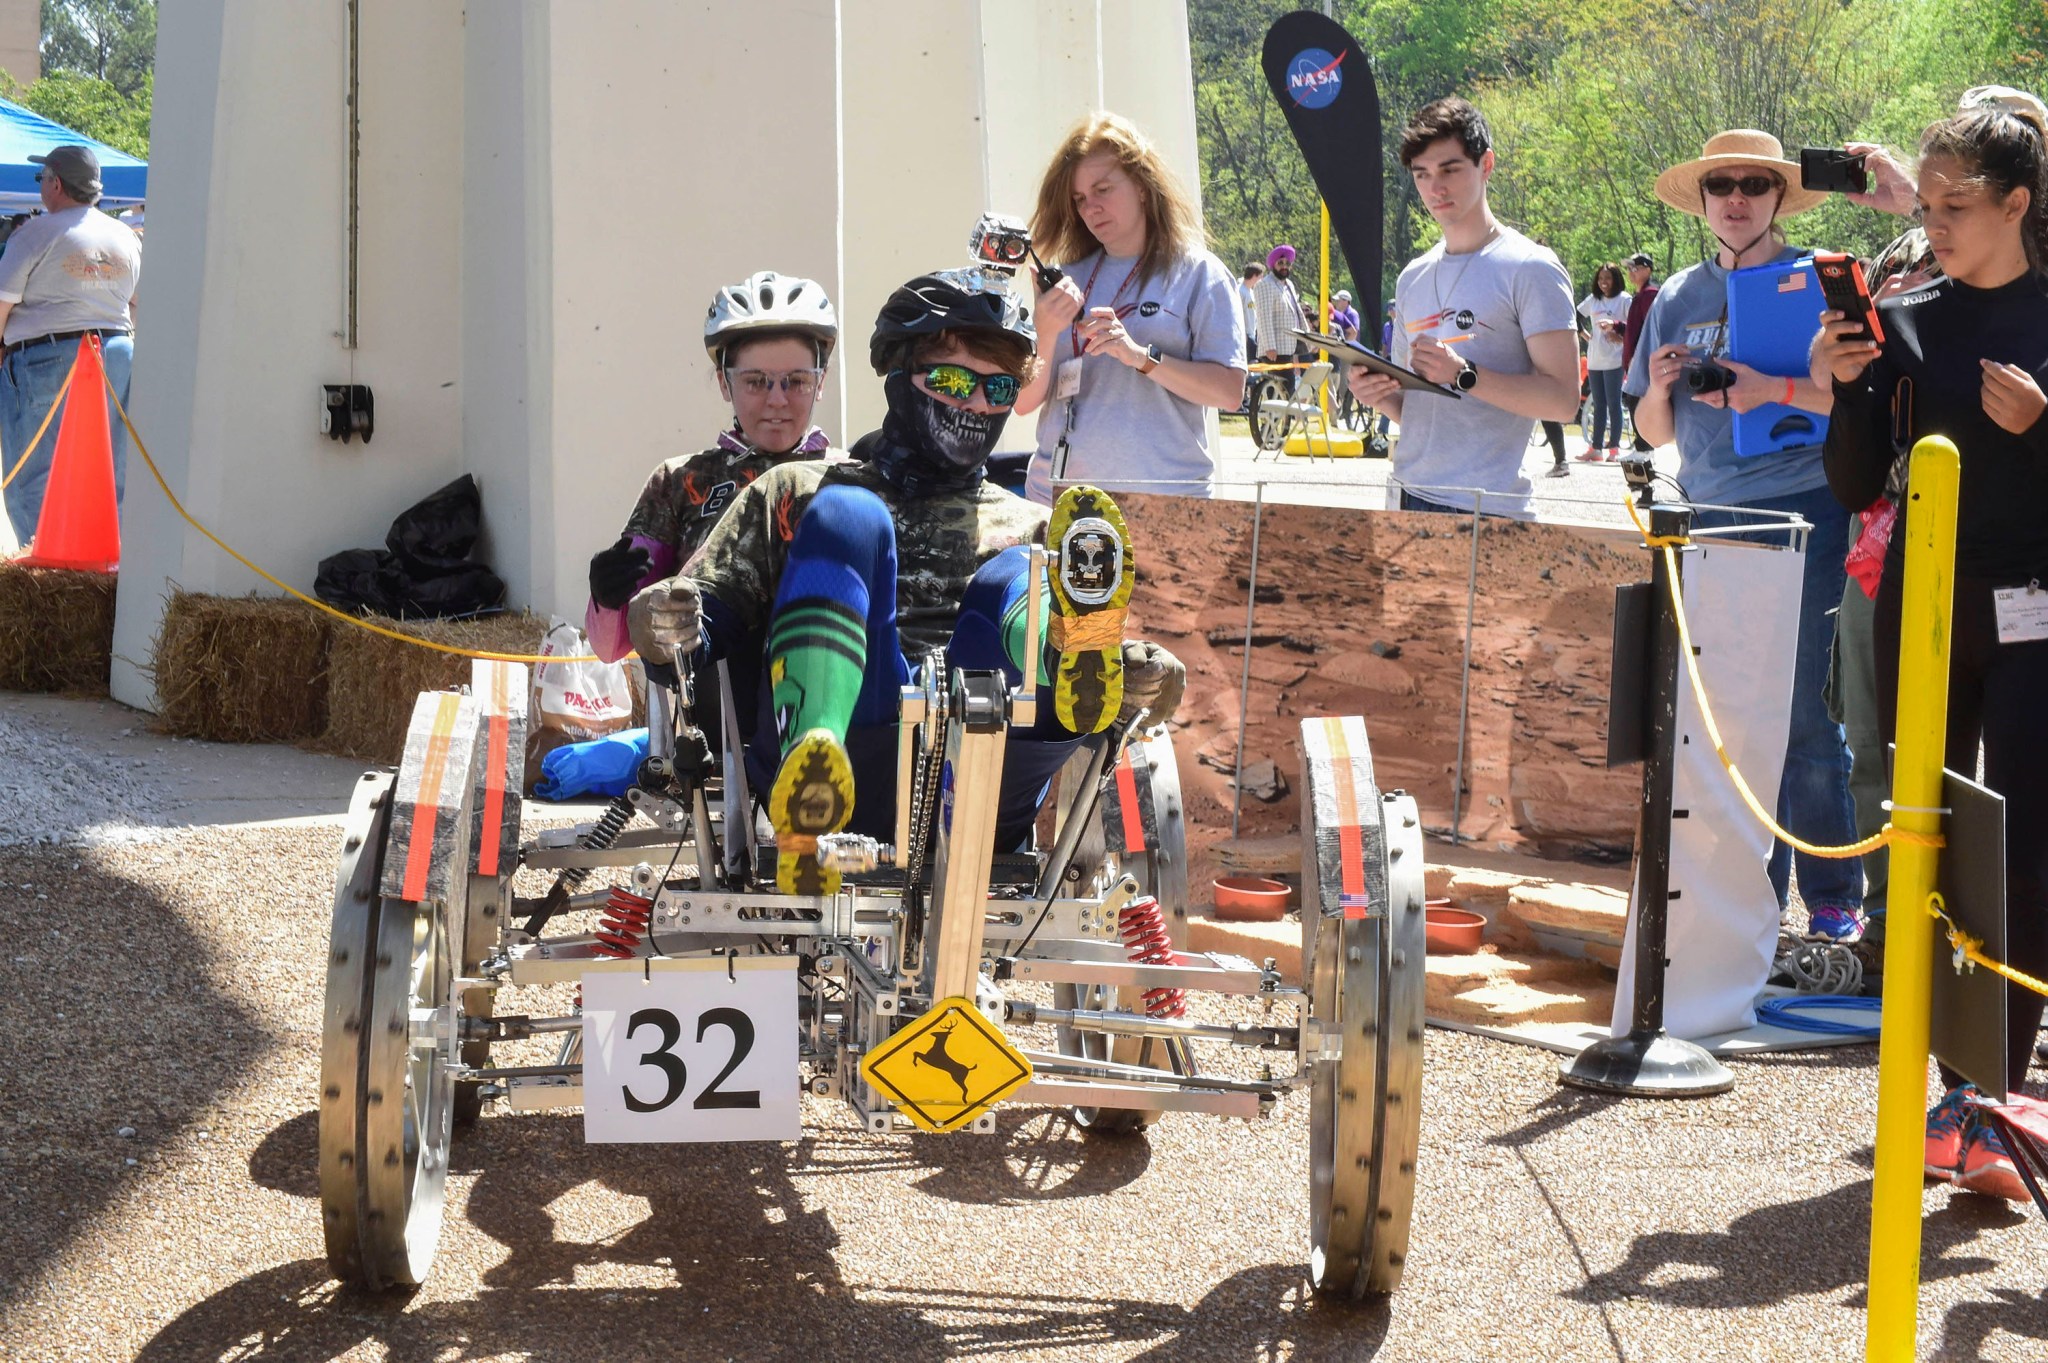 Student competitors from Buckhorn High School in New Market, Alabama, in the 2018 NASA Human Exploration Rover Challenge. 